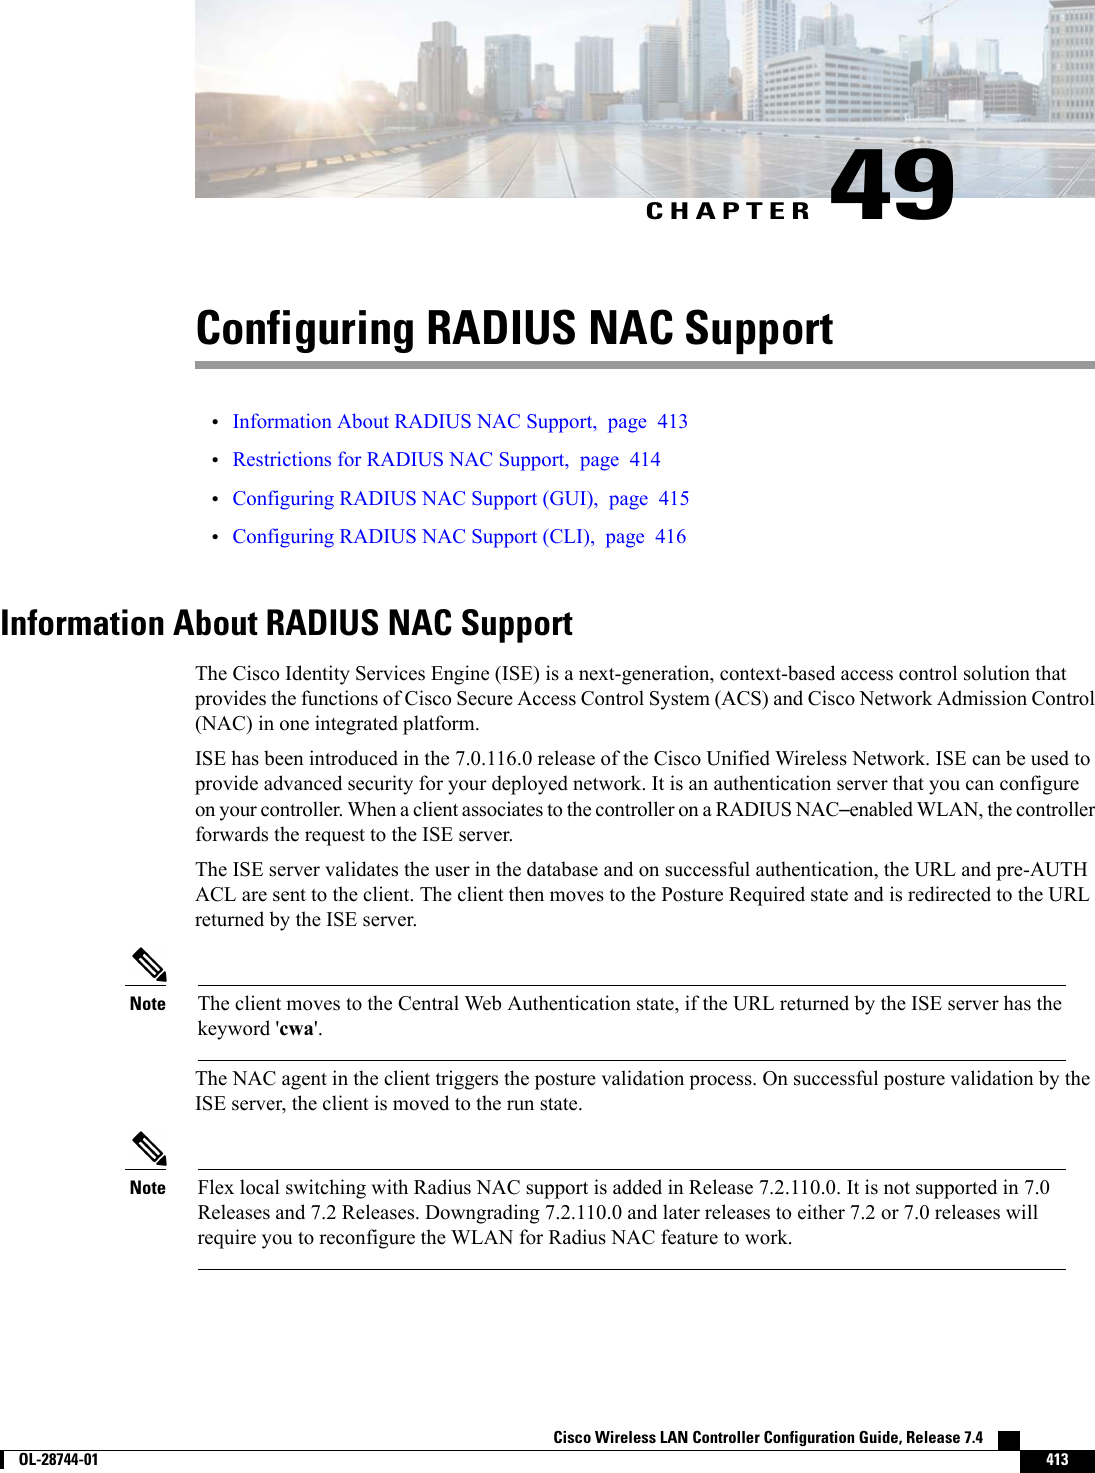 CHAPTER 49Configuring RADIUS NAC Support•Information About RADIUS NAC Support, page 413•Restrictions for RADIUS NAC Support, page 414•Configuring RADIUS NAC Support (GUI), page 415•Configuring RADIUS NAC Support (CLI), page 416Information About RADIUS NAC SupportThe Cisco Identity Services Engine (ISE) is a next-generation, context-based access control solution thatprovides the functions of Cisco Secure Access Control System (ACS) and Cisco Network Admission Control(NAC) in one integrated platform.ISE has been introduced in the 7.0.116.0 release of the Cisco Unified Wireless Network. ISE can be used toprovide advanced security for your deployed network. It is an authentication server that you can configureon your controller. When a client associates to the controller on a RADIUS NAC–enabled WLAN, the controllerforwards the request to the ISE server.The ISE server validates the user in the database and on successful authentication, the URL and pre-AUTHACL are sent to the client. The client then moves to the Posture Required state and is redirected to the URLreturned by the ISE server.The client moves to the Central Web Authentication state, if the URL returned by the ISE server has thekeyword &apos;cwa&apos;.NoteThe NAC agent in the client triggers the posture validation process. On successful posture validation by theISE server, the client is moved to the run state.Flex local switching with Radius NAC support is added in Release 7.2.110.0. It is not supported in 7.0Releases and 7.2 Releases. Downgrading 7.2.110.0 and later releases to either 7.2 or 7.0 releases willrequire you to reconfigure the WLAN for Radius NAC feature to work.NoteCisco Wireless LAN Controller Configuration Guide, Release 7.4        OL-28744-01 413